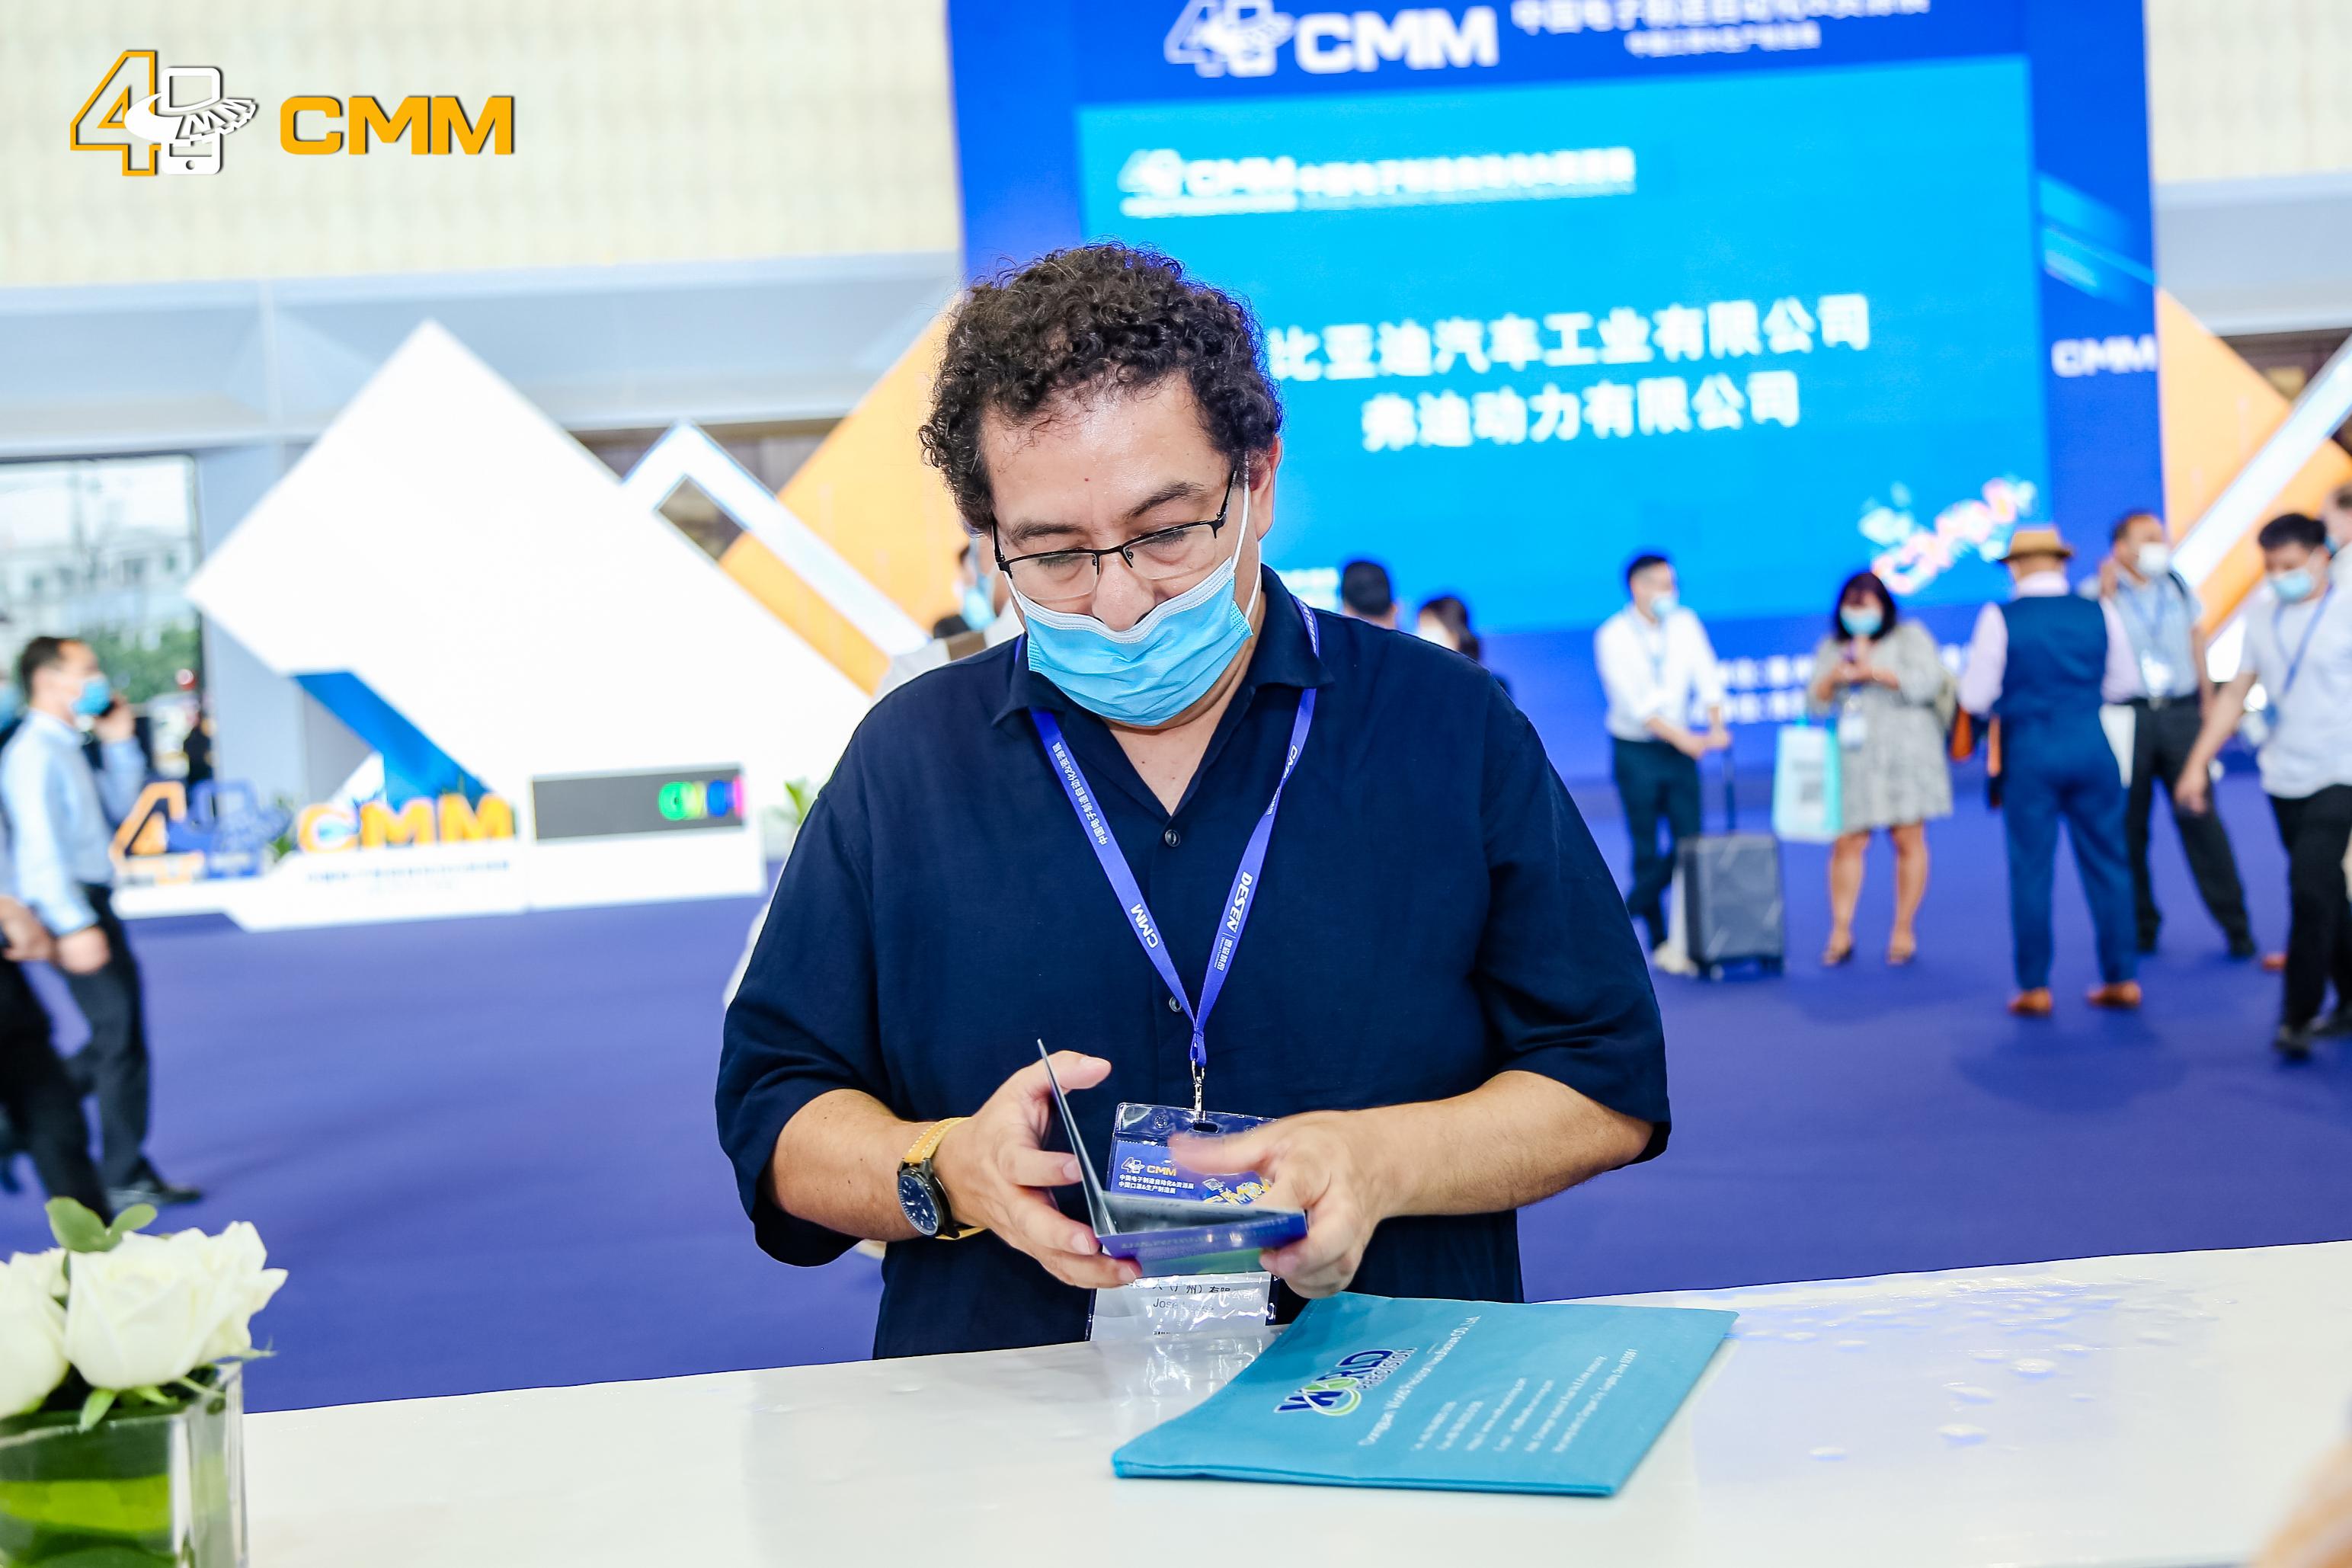 CMM Electronic Manufacturing Automation Exhibition 2020